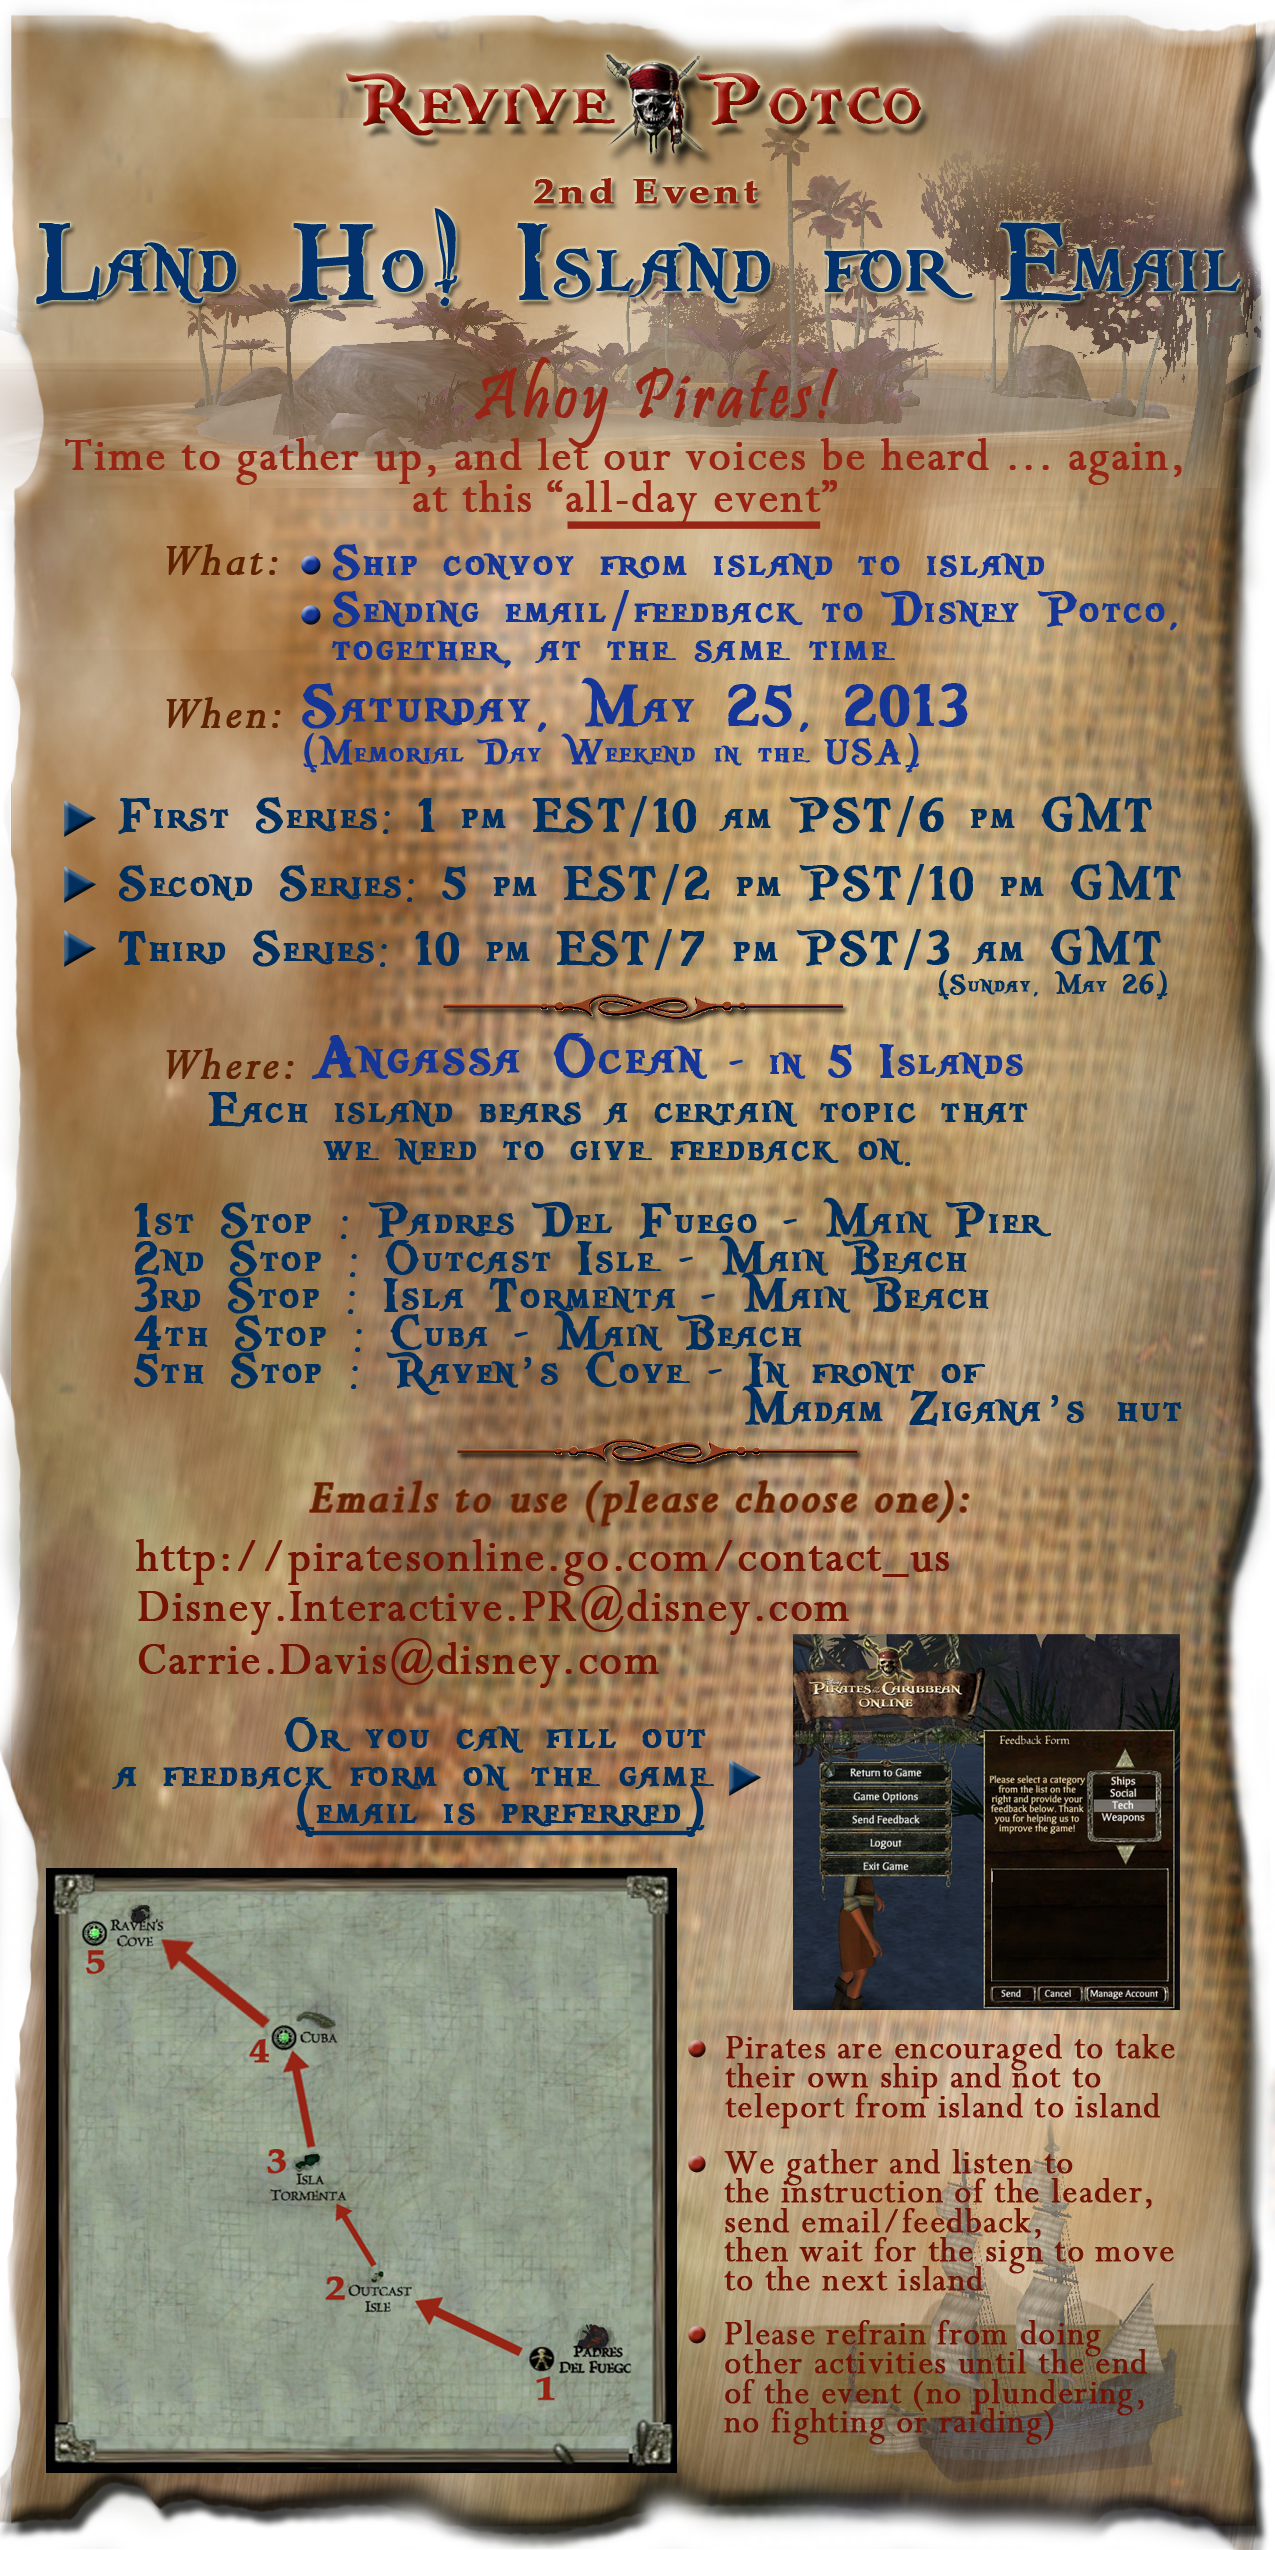 RP 2nd Event flyer.png